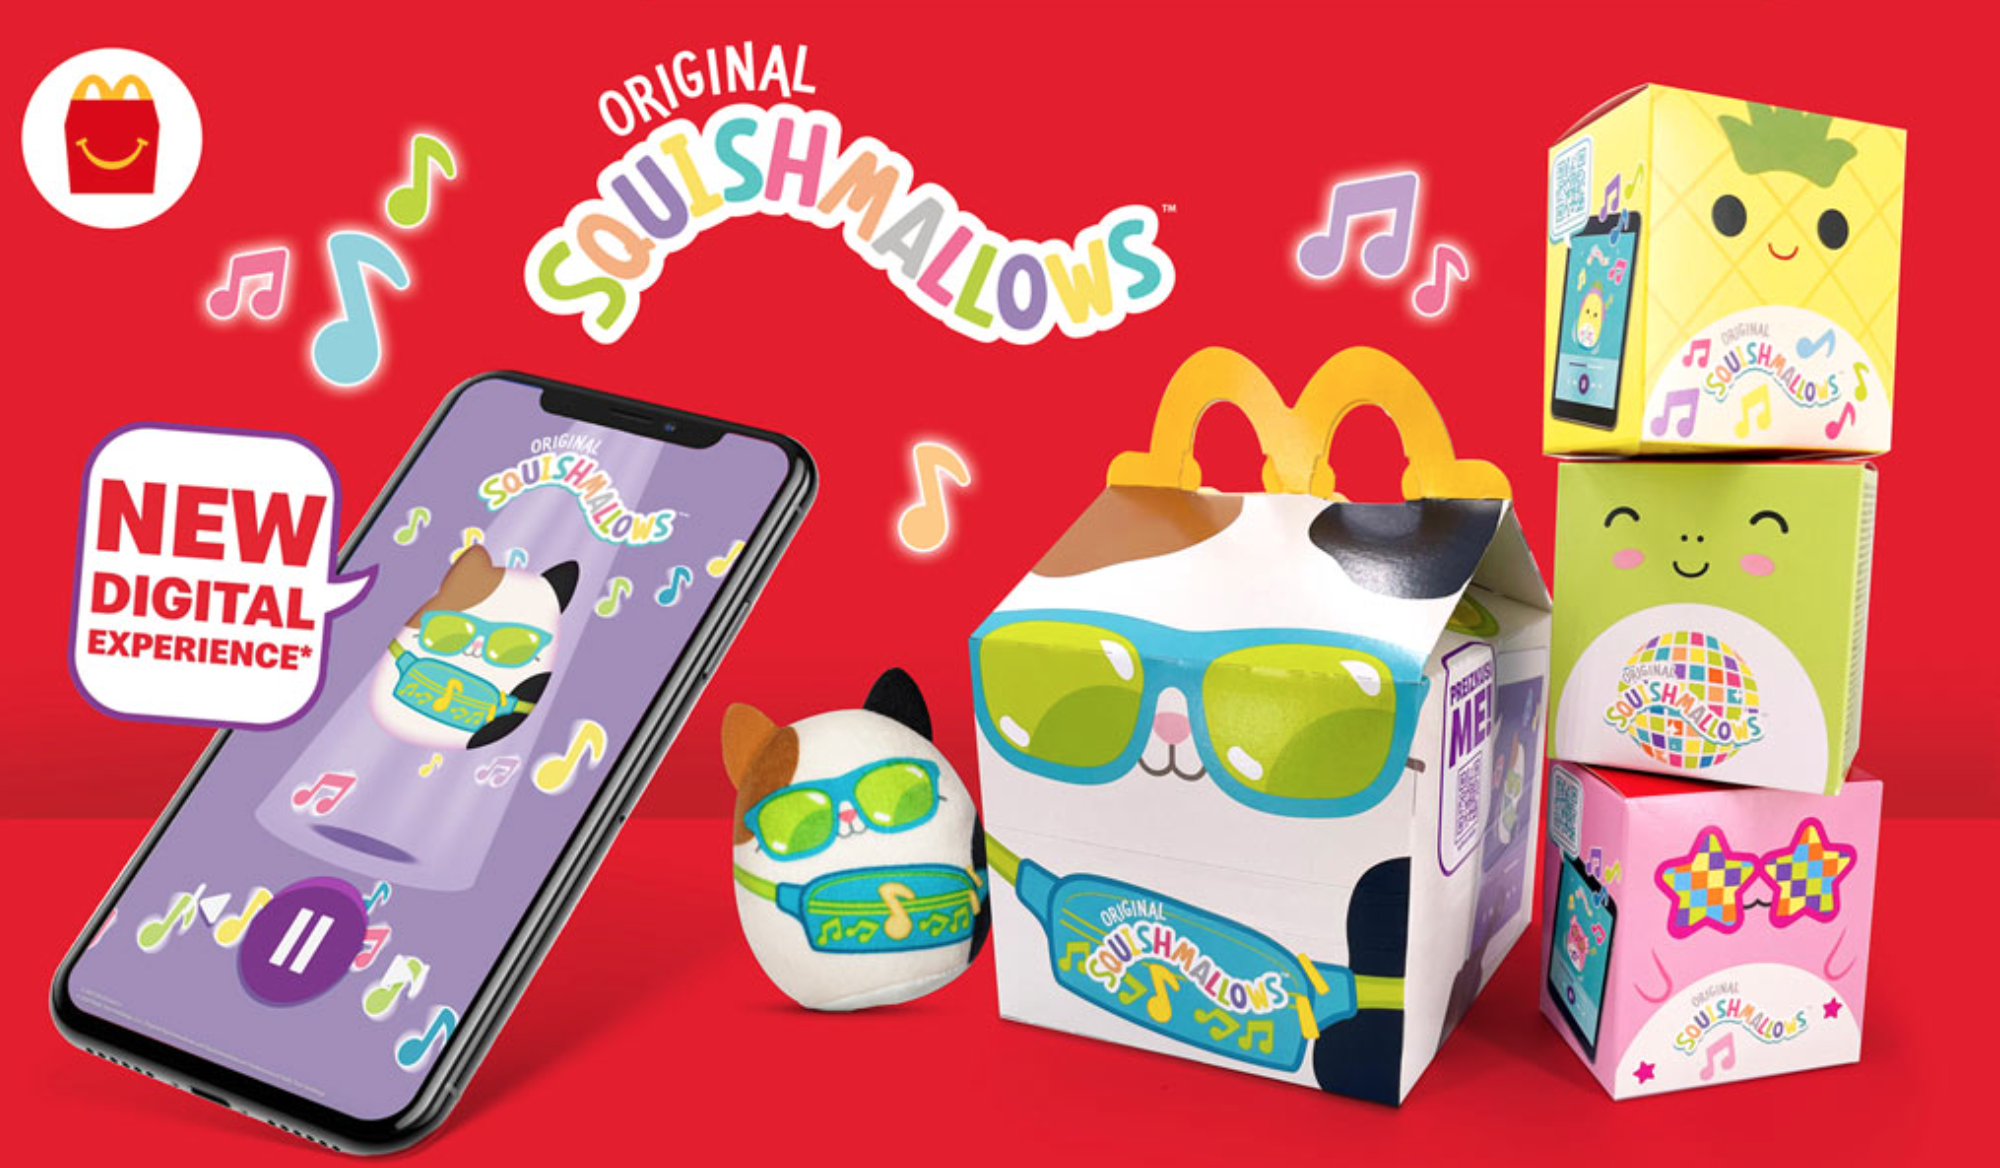 McDonald's Announces NEW Menu Item and Happy Meal Toys But There's a